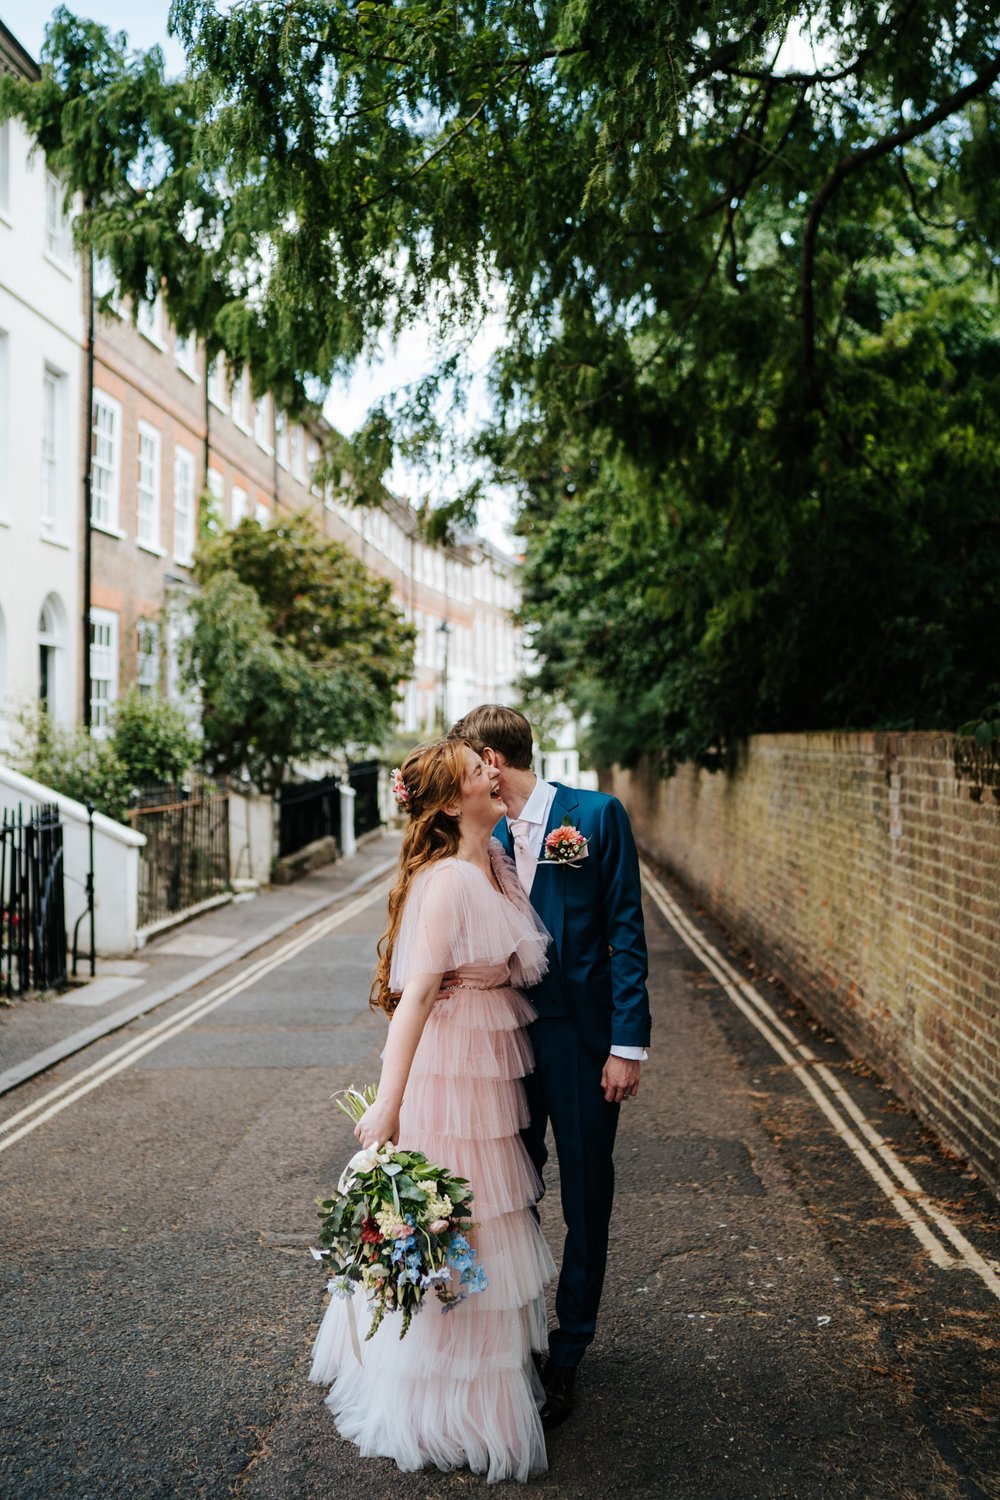 Groom whispers something in ear of bride wearing pink dress as she reacts with laughter in gorgeous York House wedding photograph